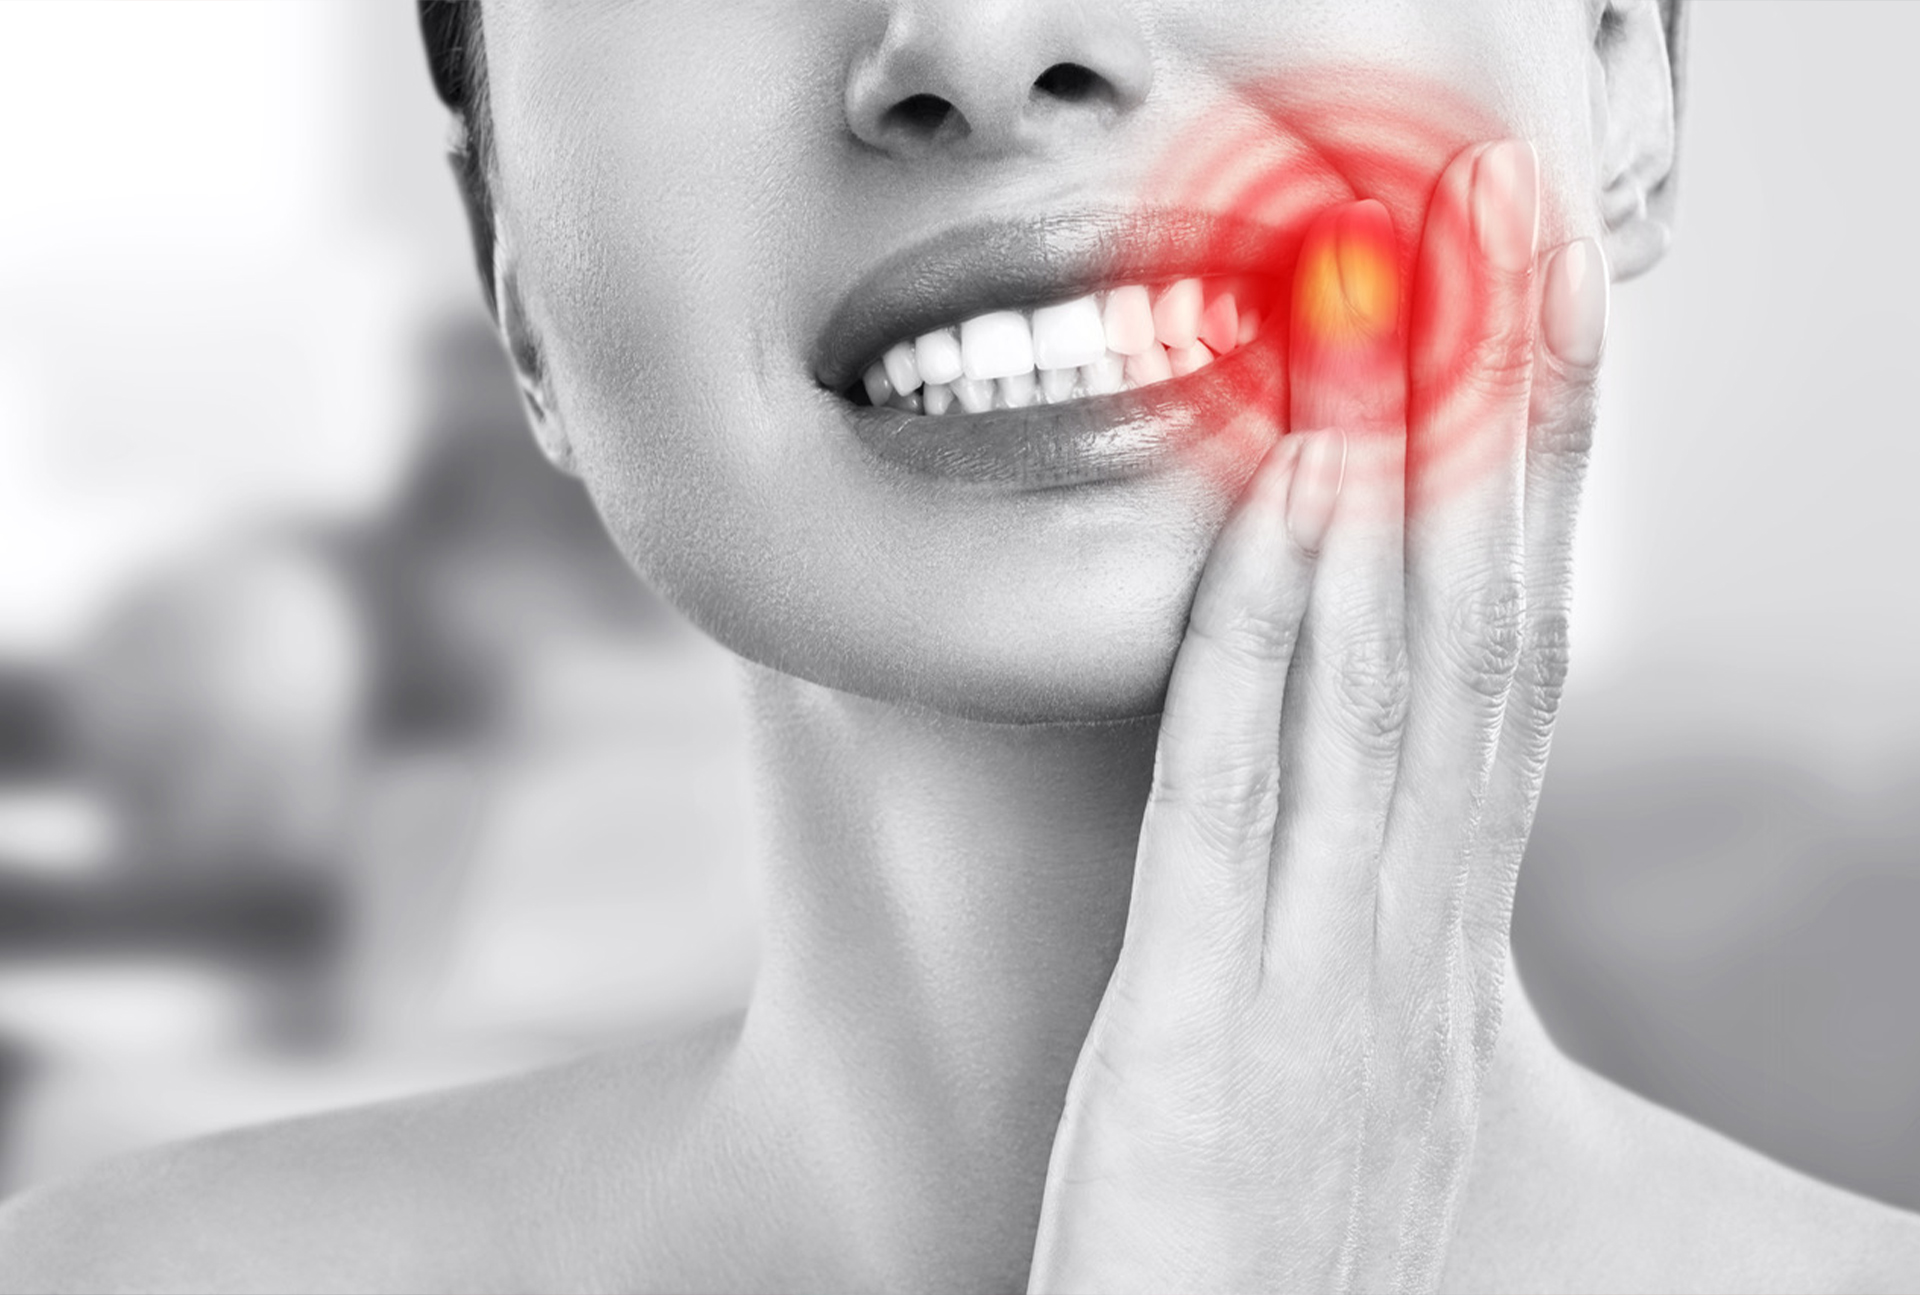 Solving Dental Problems that are affecting your Health